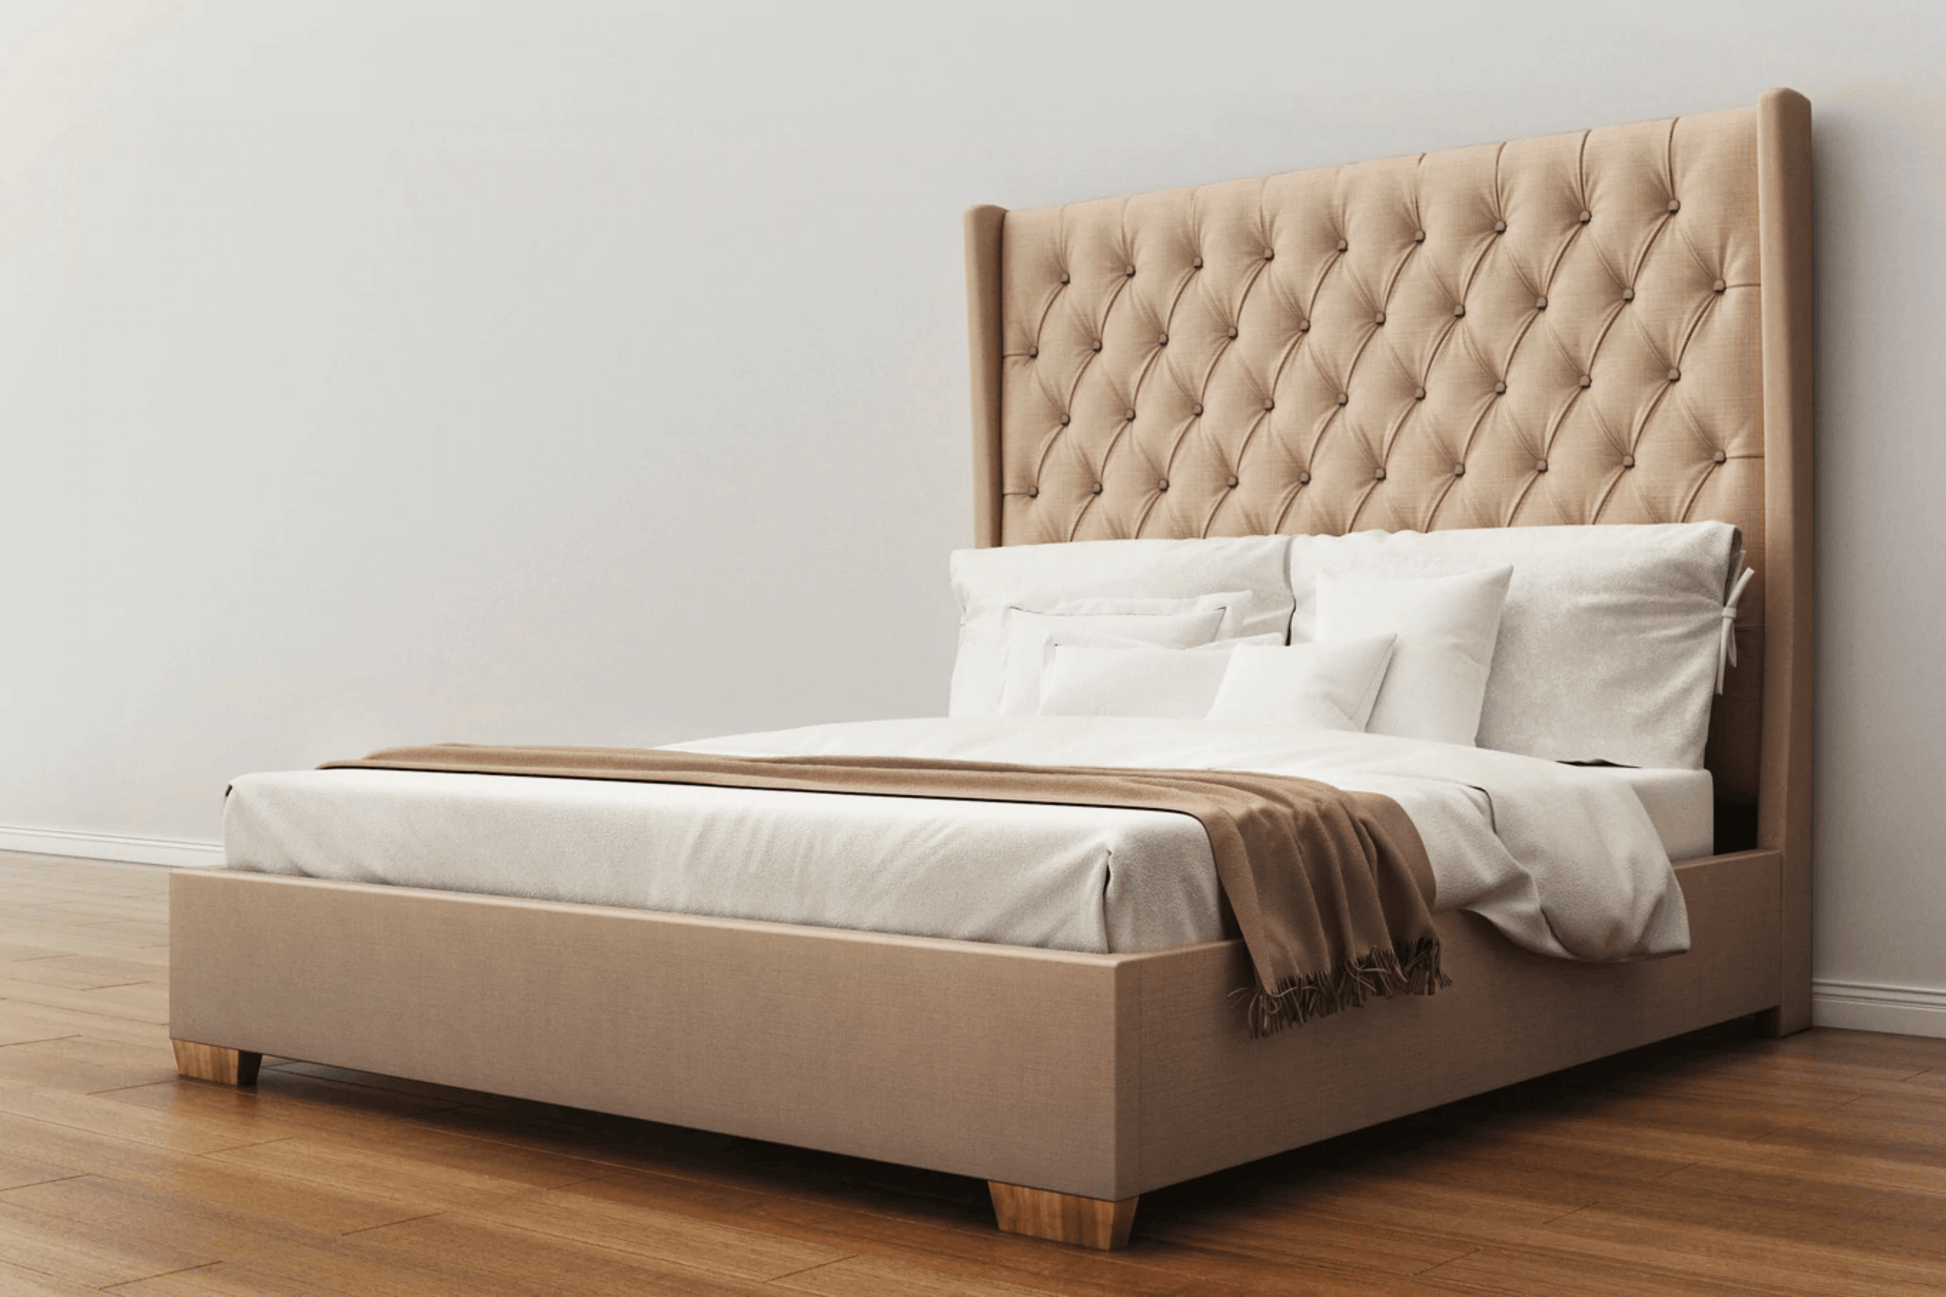 This impressively styled bed makes a bold yet fashionable statement